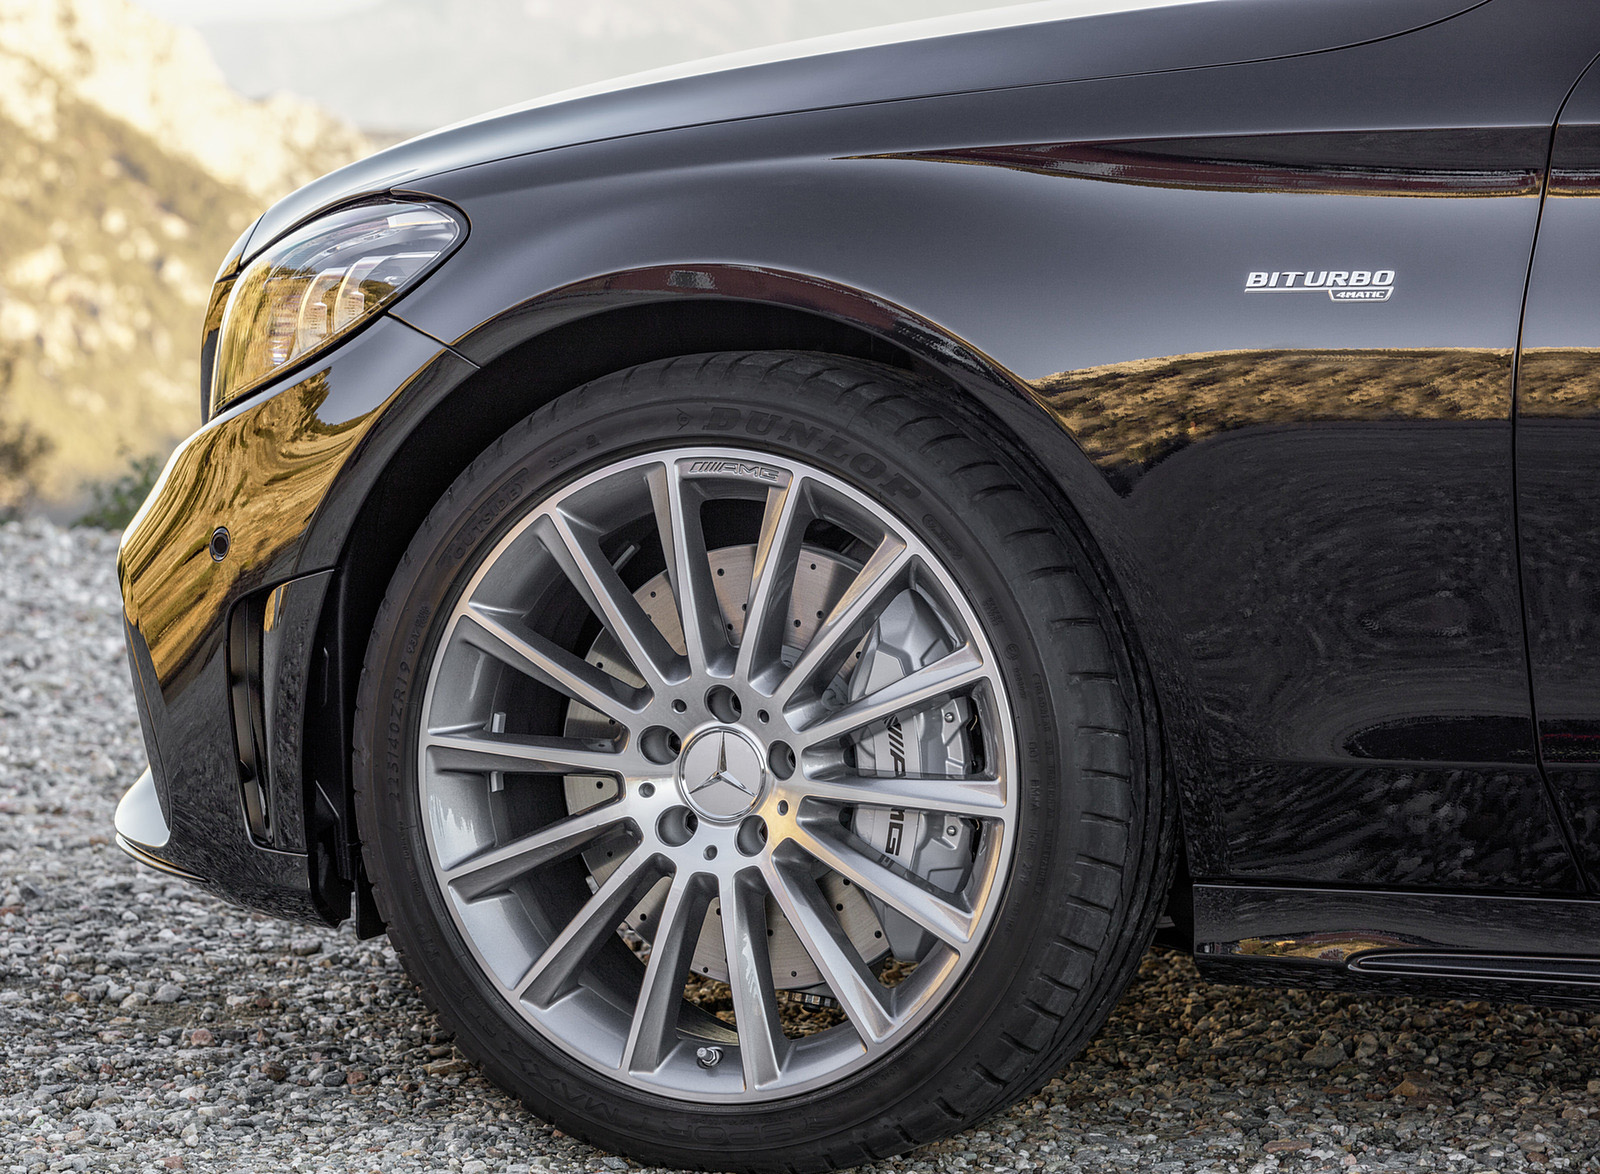 2019 Mercedes-AMG C43 4MATIC Wheel Wallpapers #187 of 191